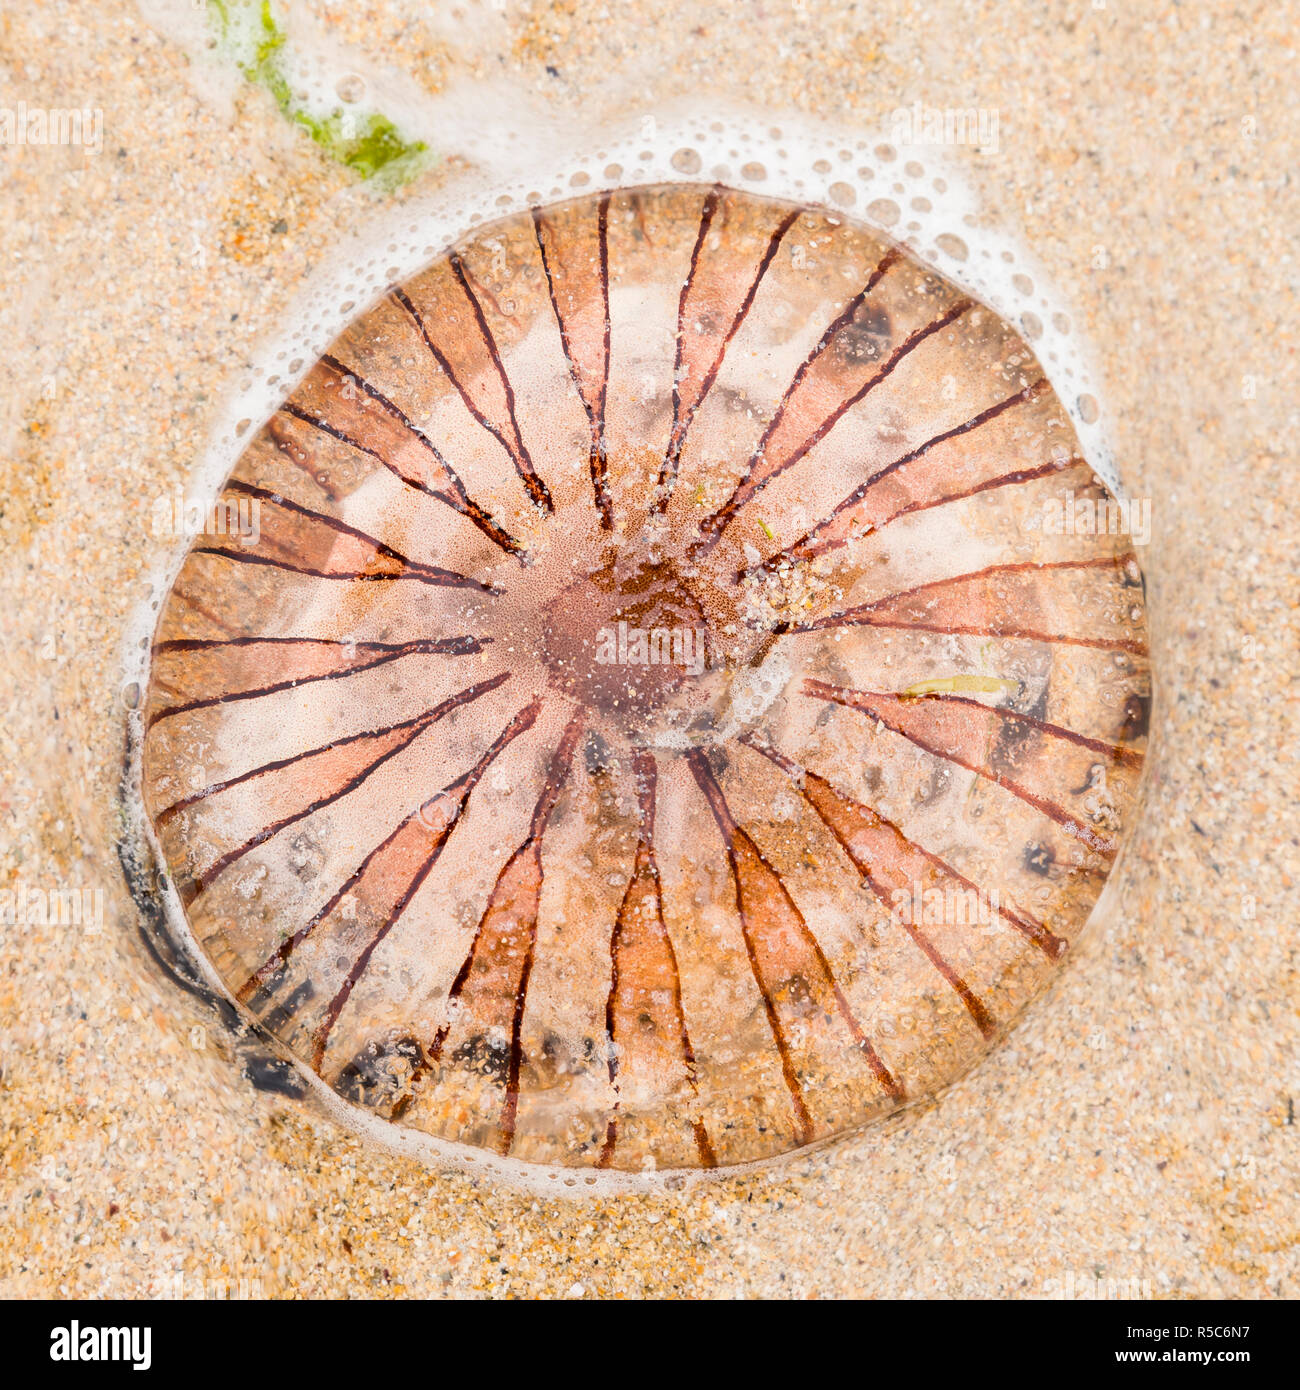 A striped Compass jellyfish (Chrysaora hysoscella) stranded on a sandy beach in Cornwall UK - top view Stock Photo